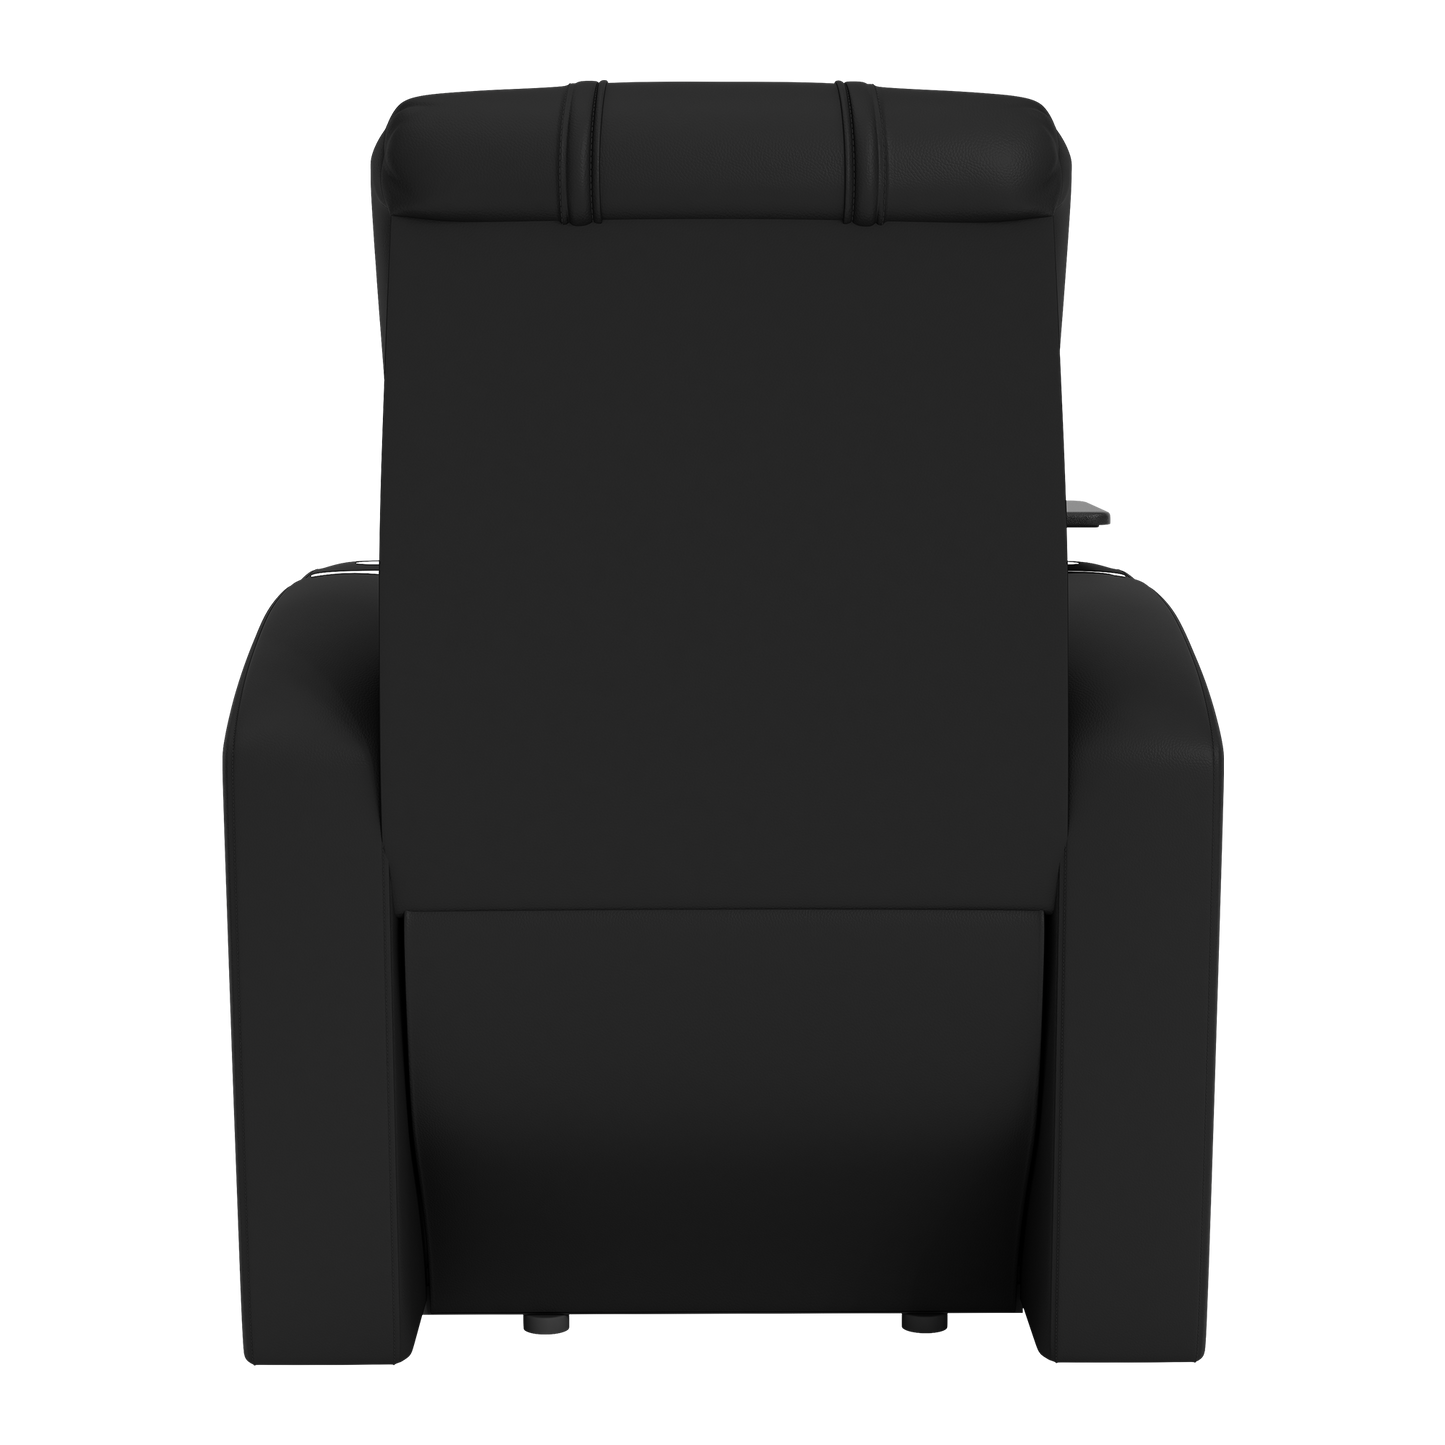 Stealth Power Plus Recliner with Houston Astros Logo